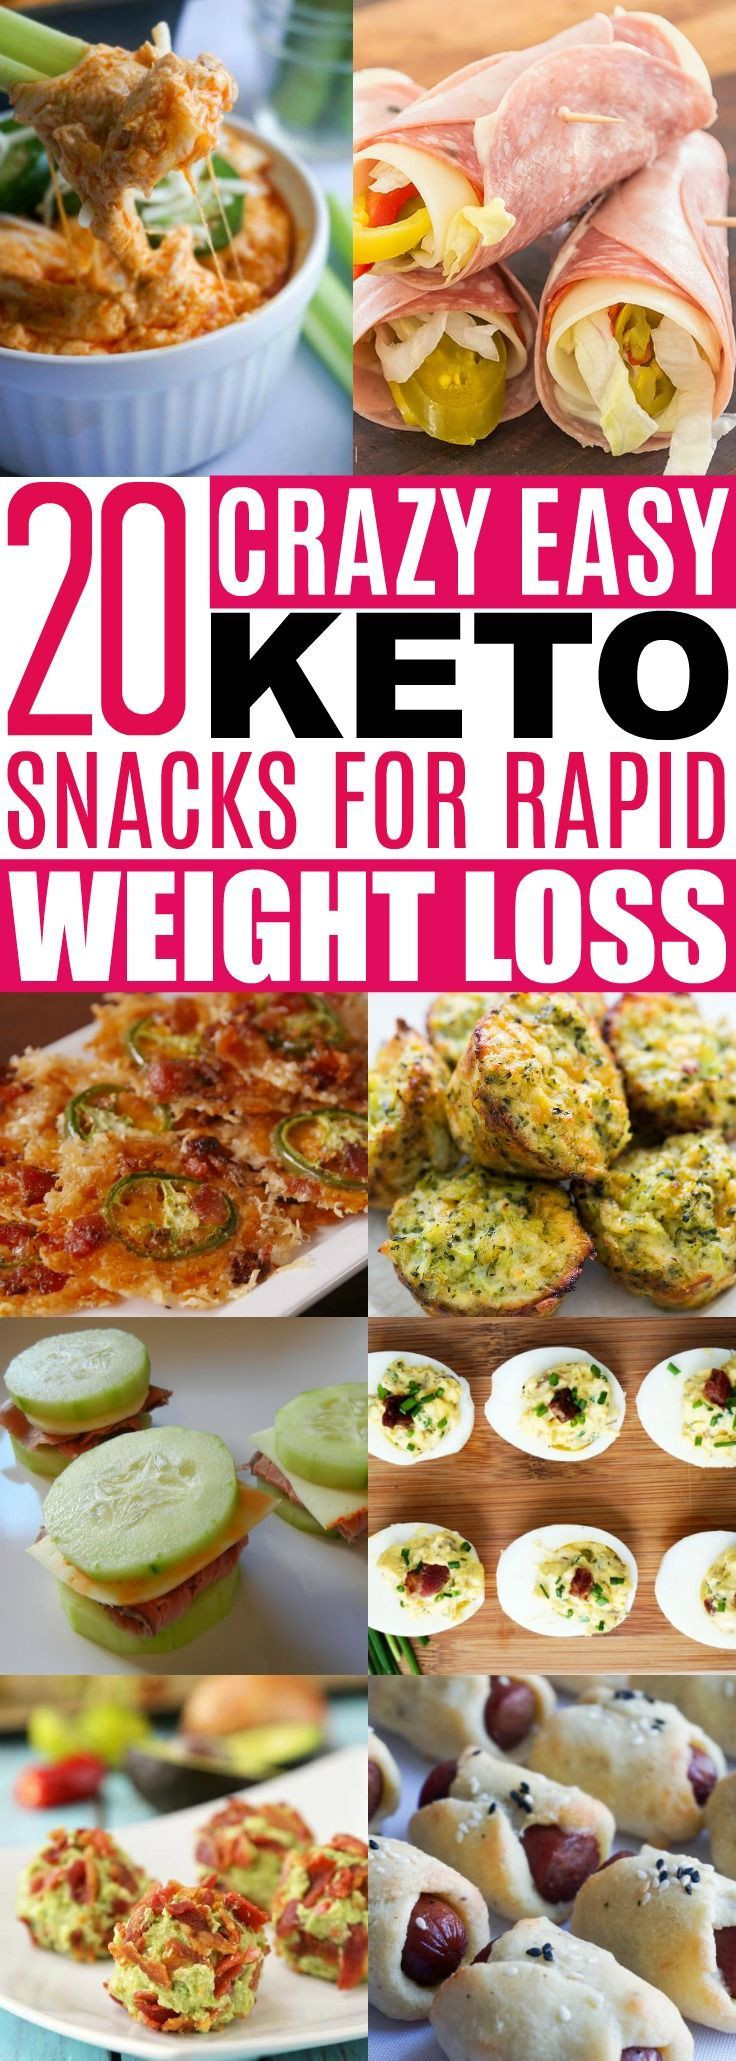 Low Carb Keto Snacks
 809 best LOW CARB SNACKS KETO LCHF images on Pinterest